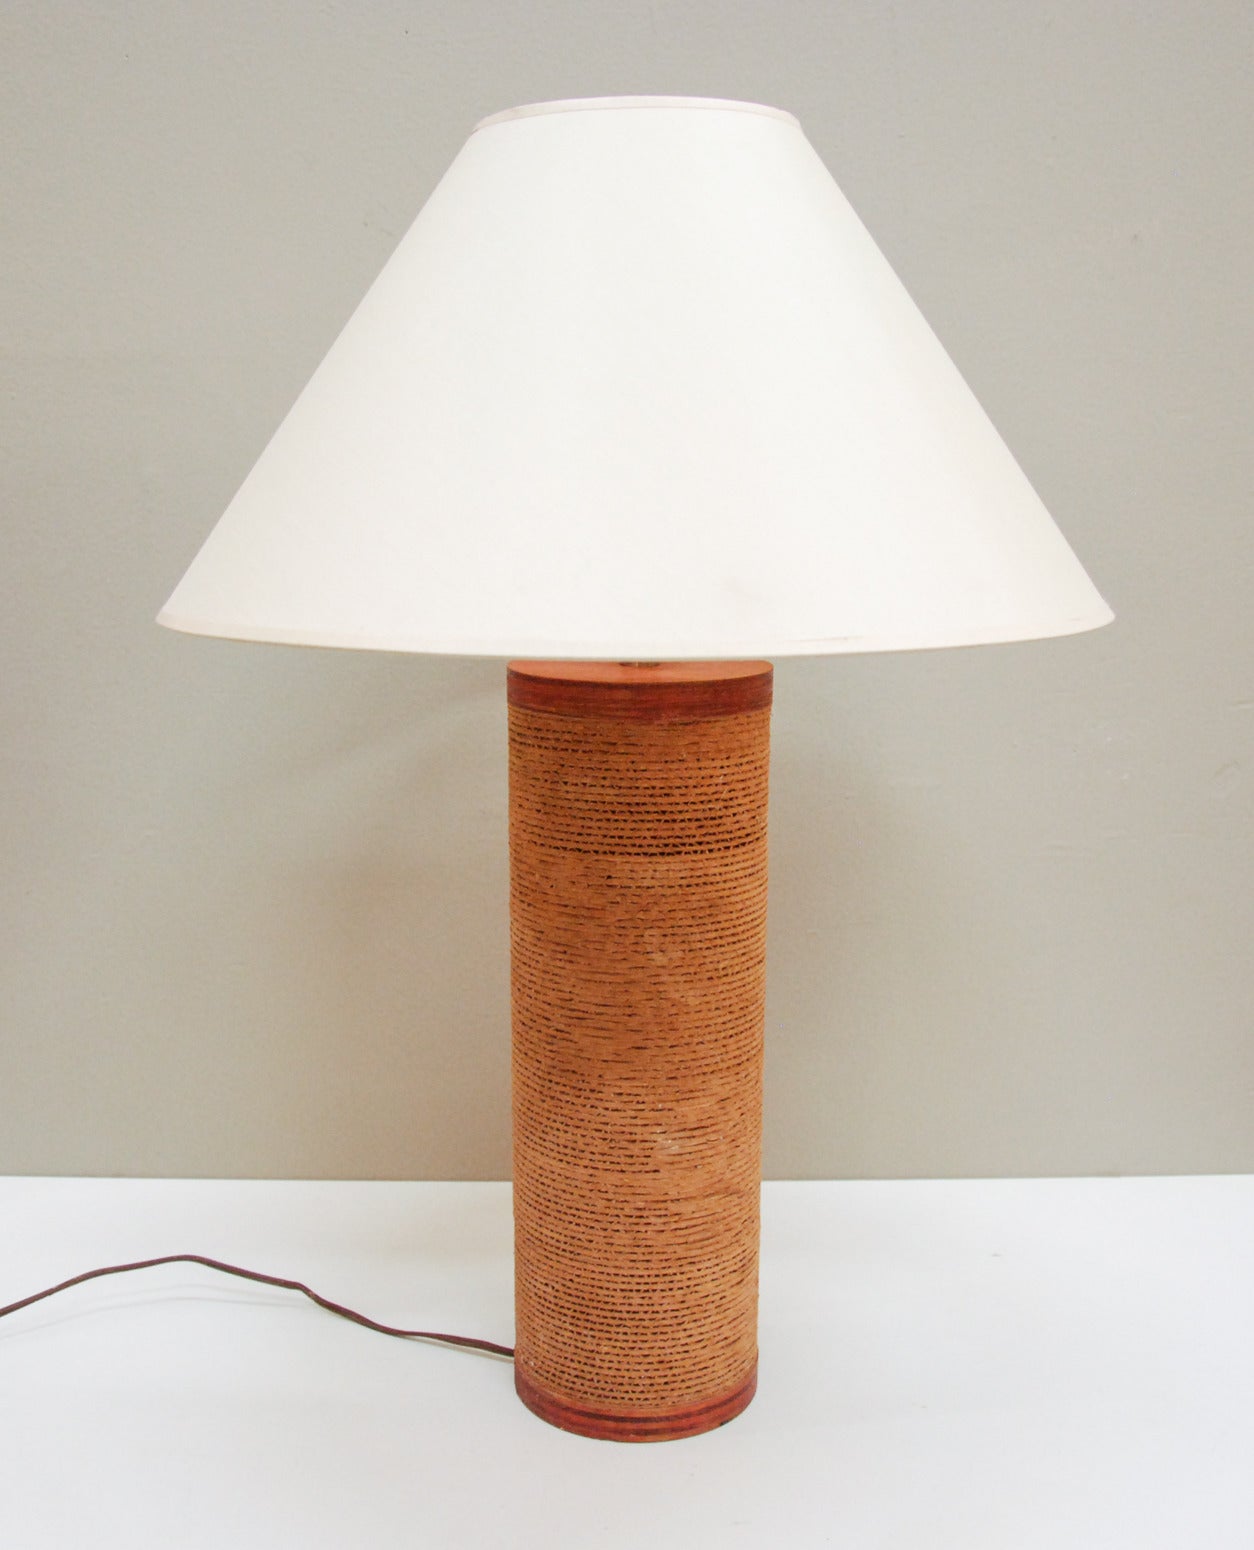 A cylindrical cardboard and plywood table lamp that is often incorrectly attributed to Frank Gehry and the Easy Edges line.  This Gregory Van Pelt for Raymor lamp has a beautiful golden patina to the plywood and is in excellent